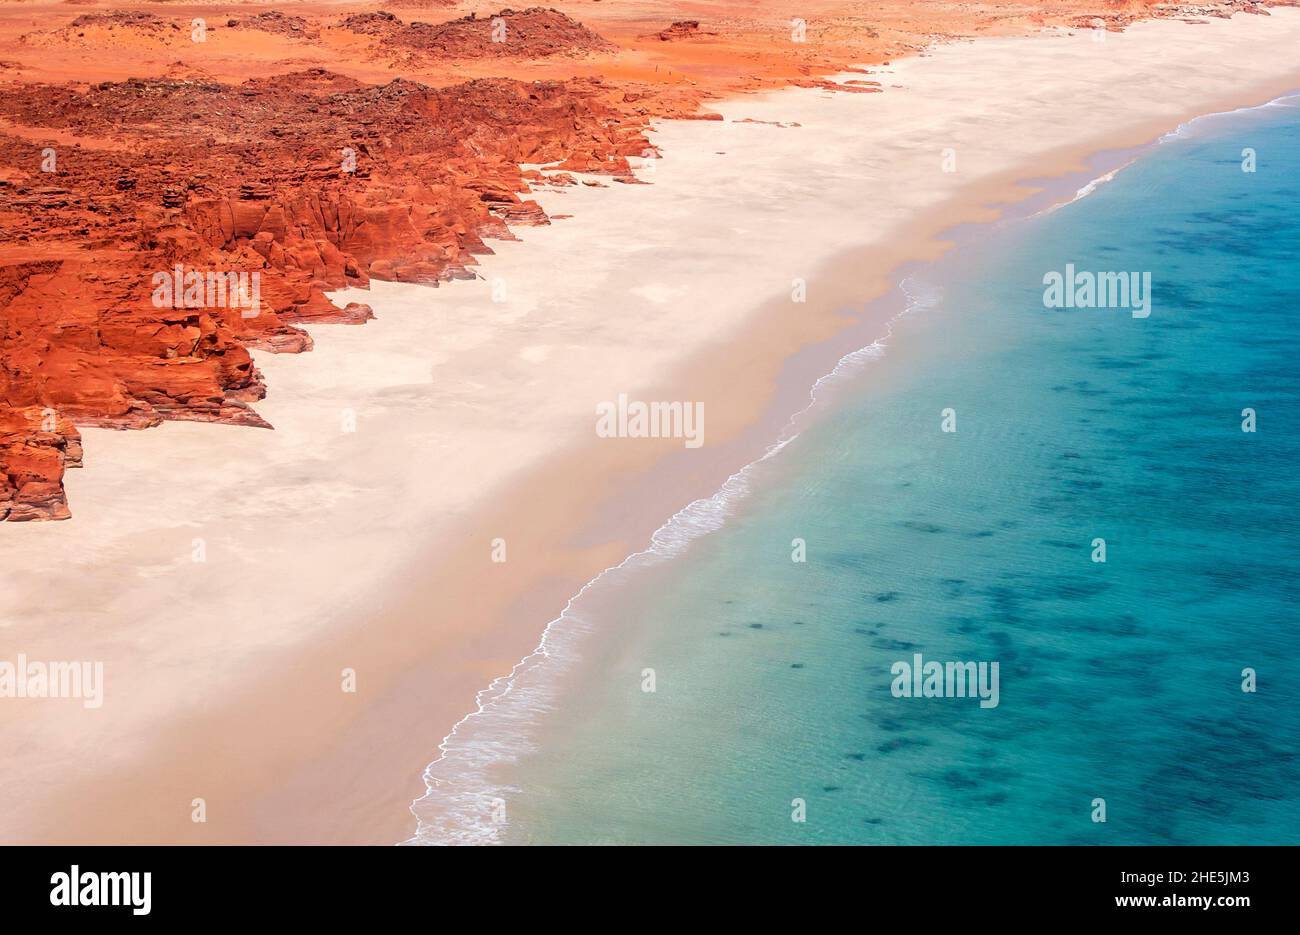 A section of the incredible West Kimberley coastline at Cape Leveque in Western Australia in Australia. Stock Photo